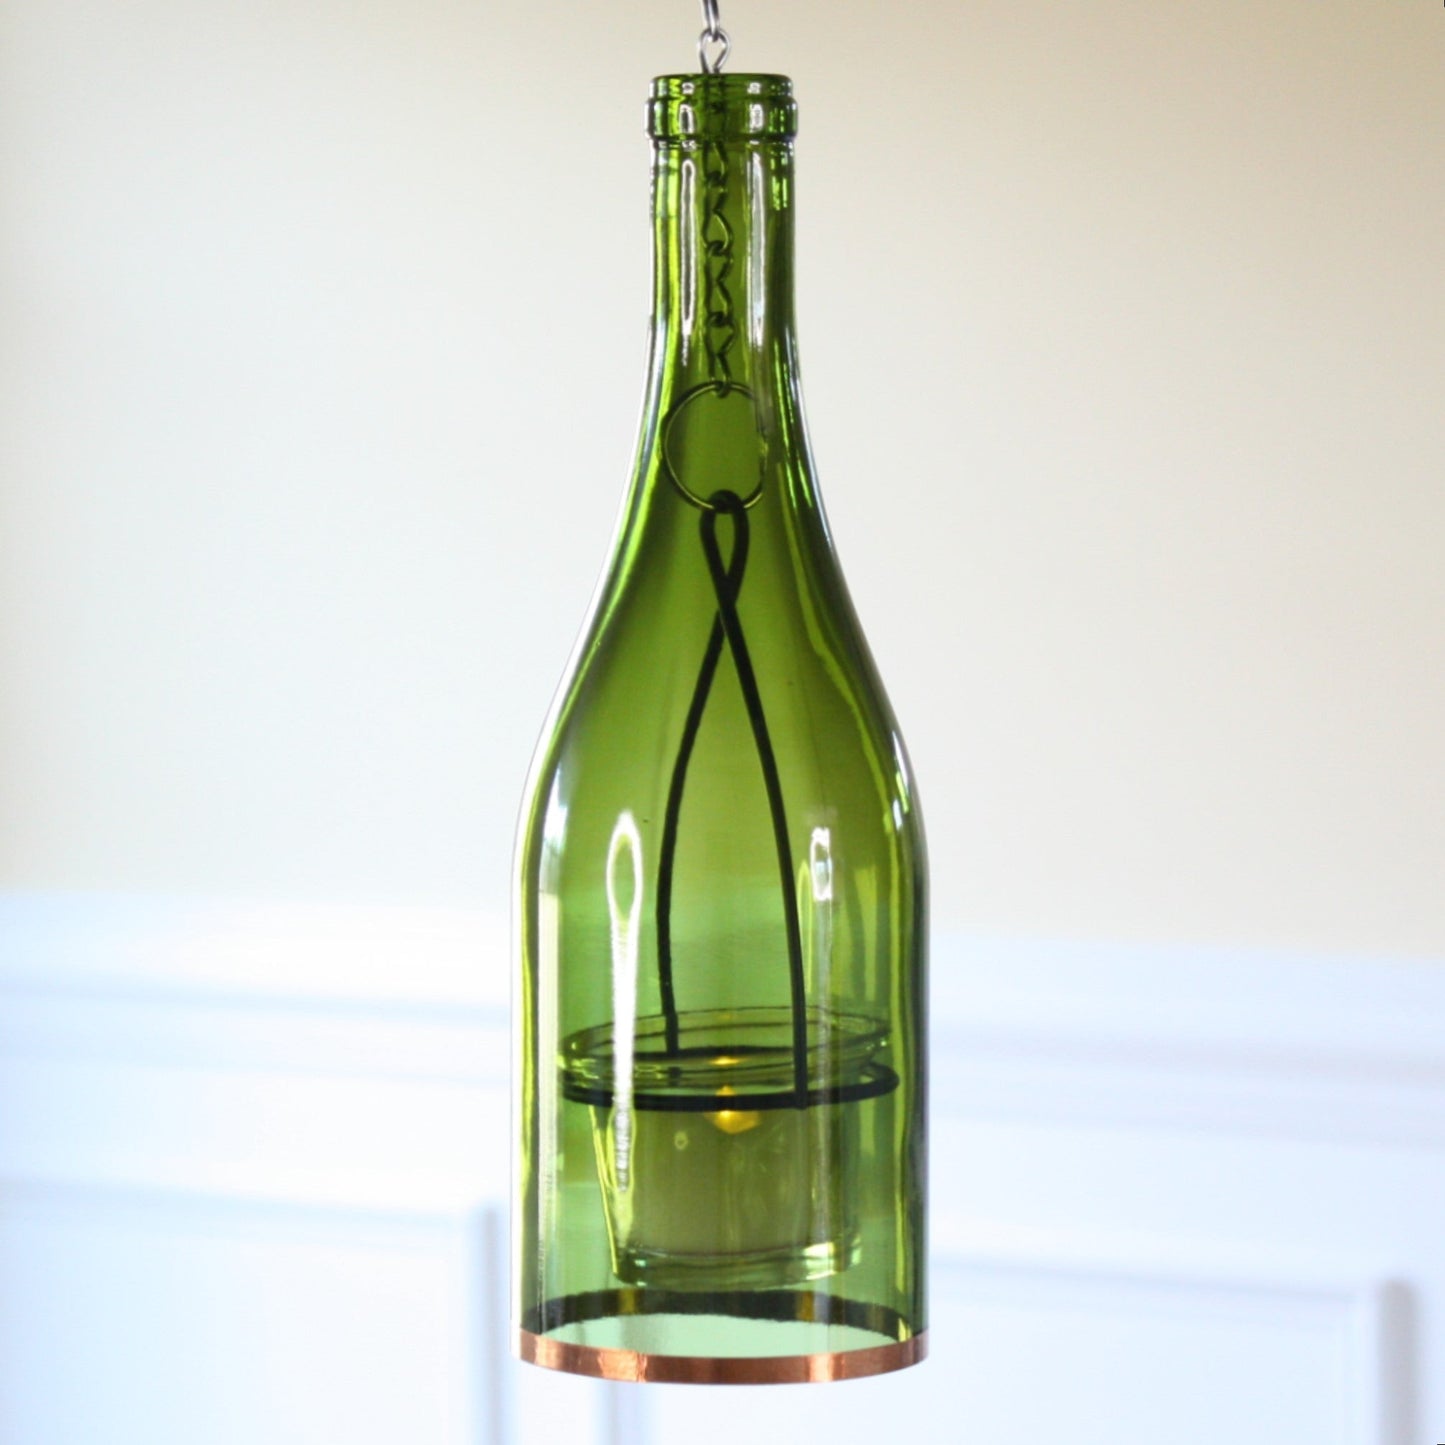 Wine Bottle Hanging Votive Holder - Made in the USA